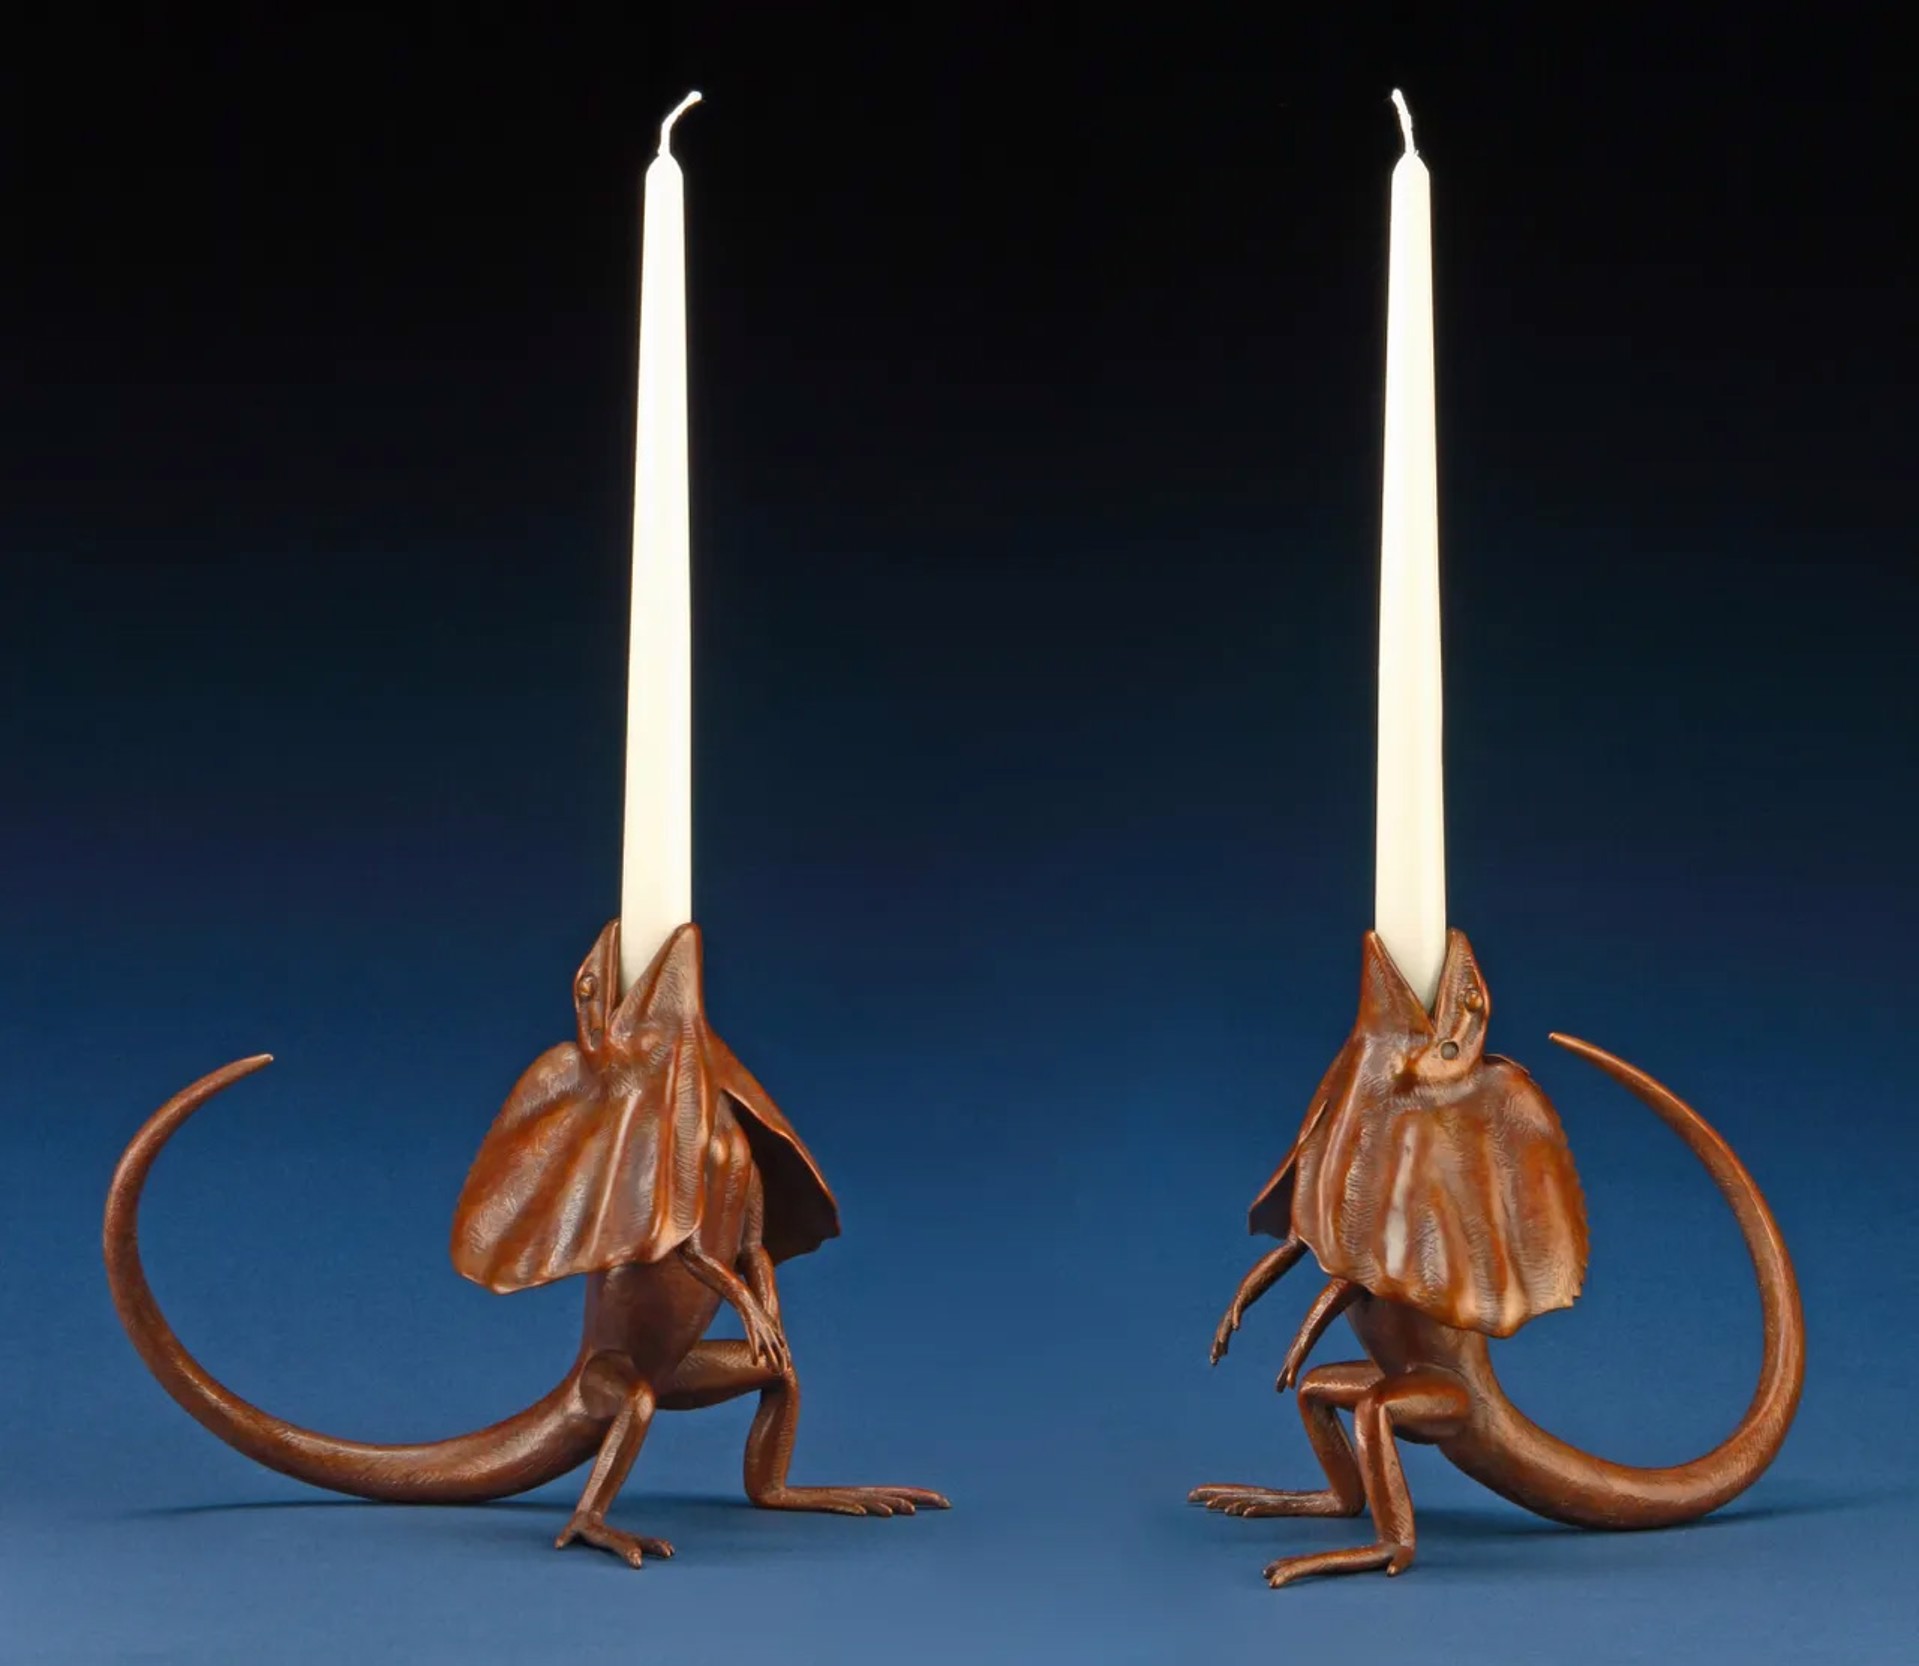 Frilled Lizard (Candle Holders) by Tony Hochstetler